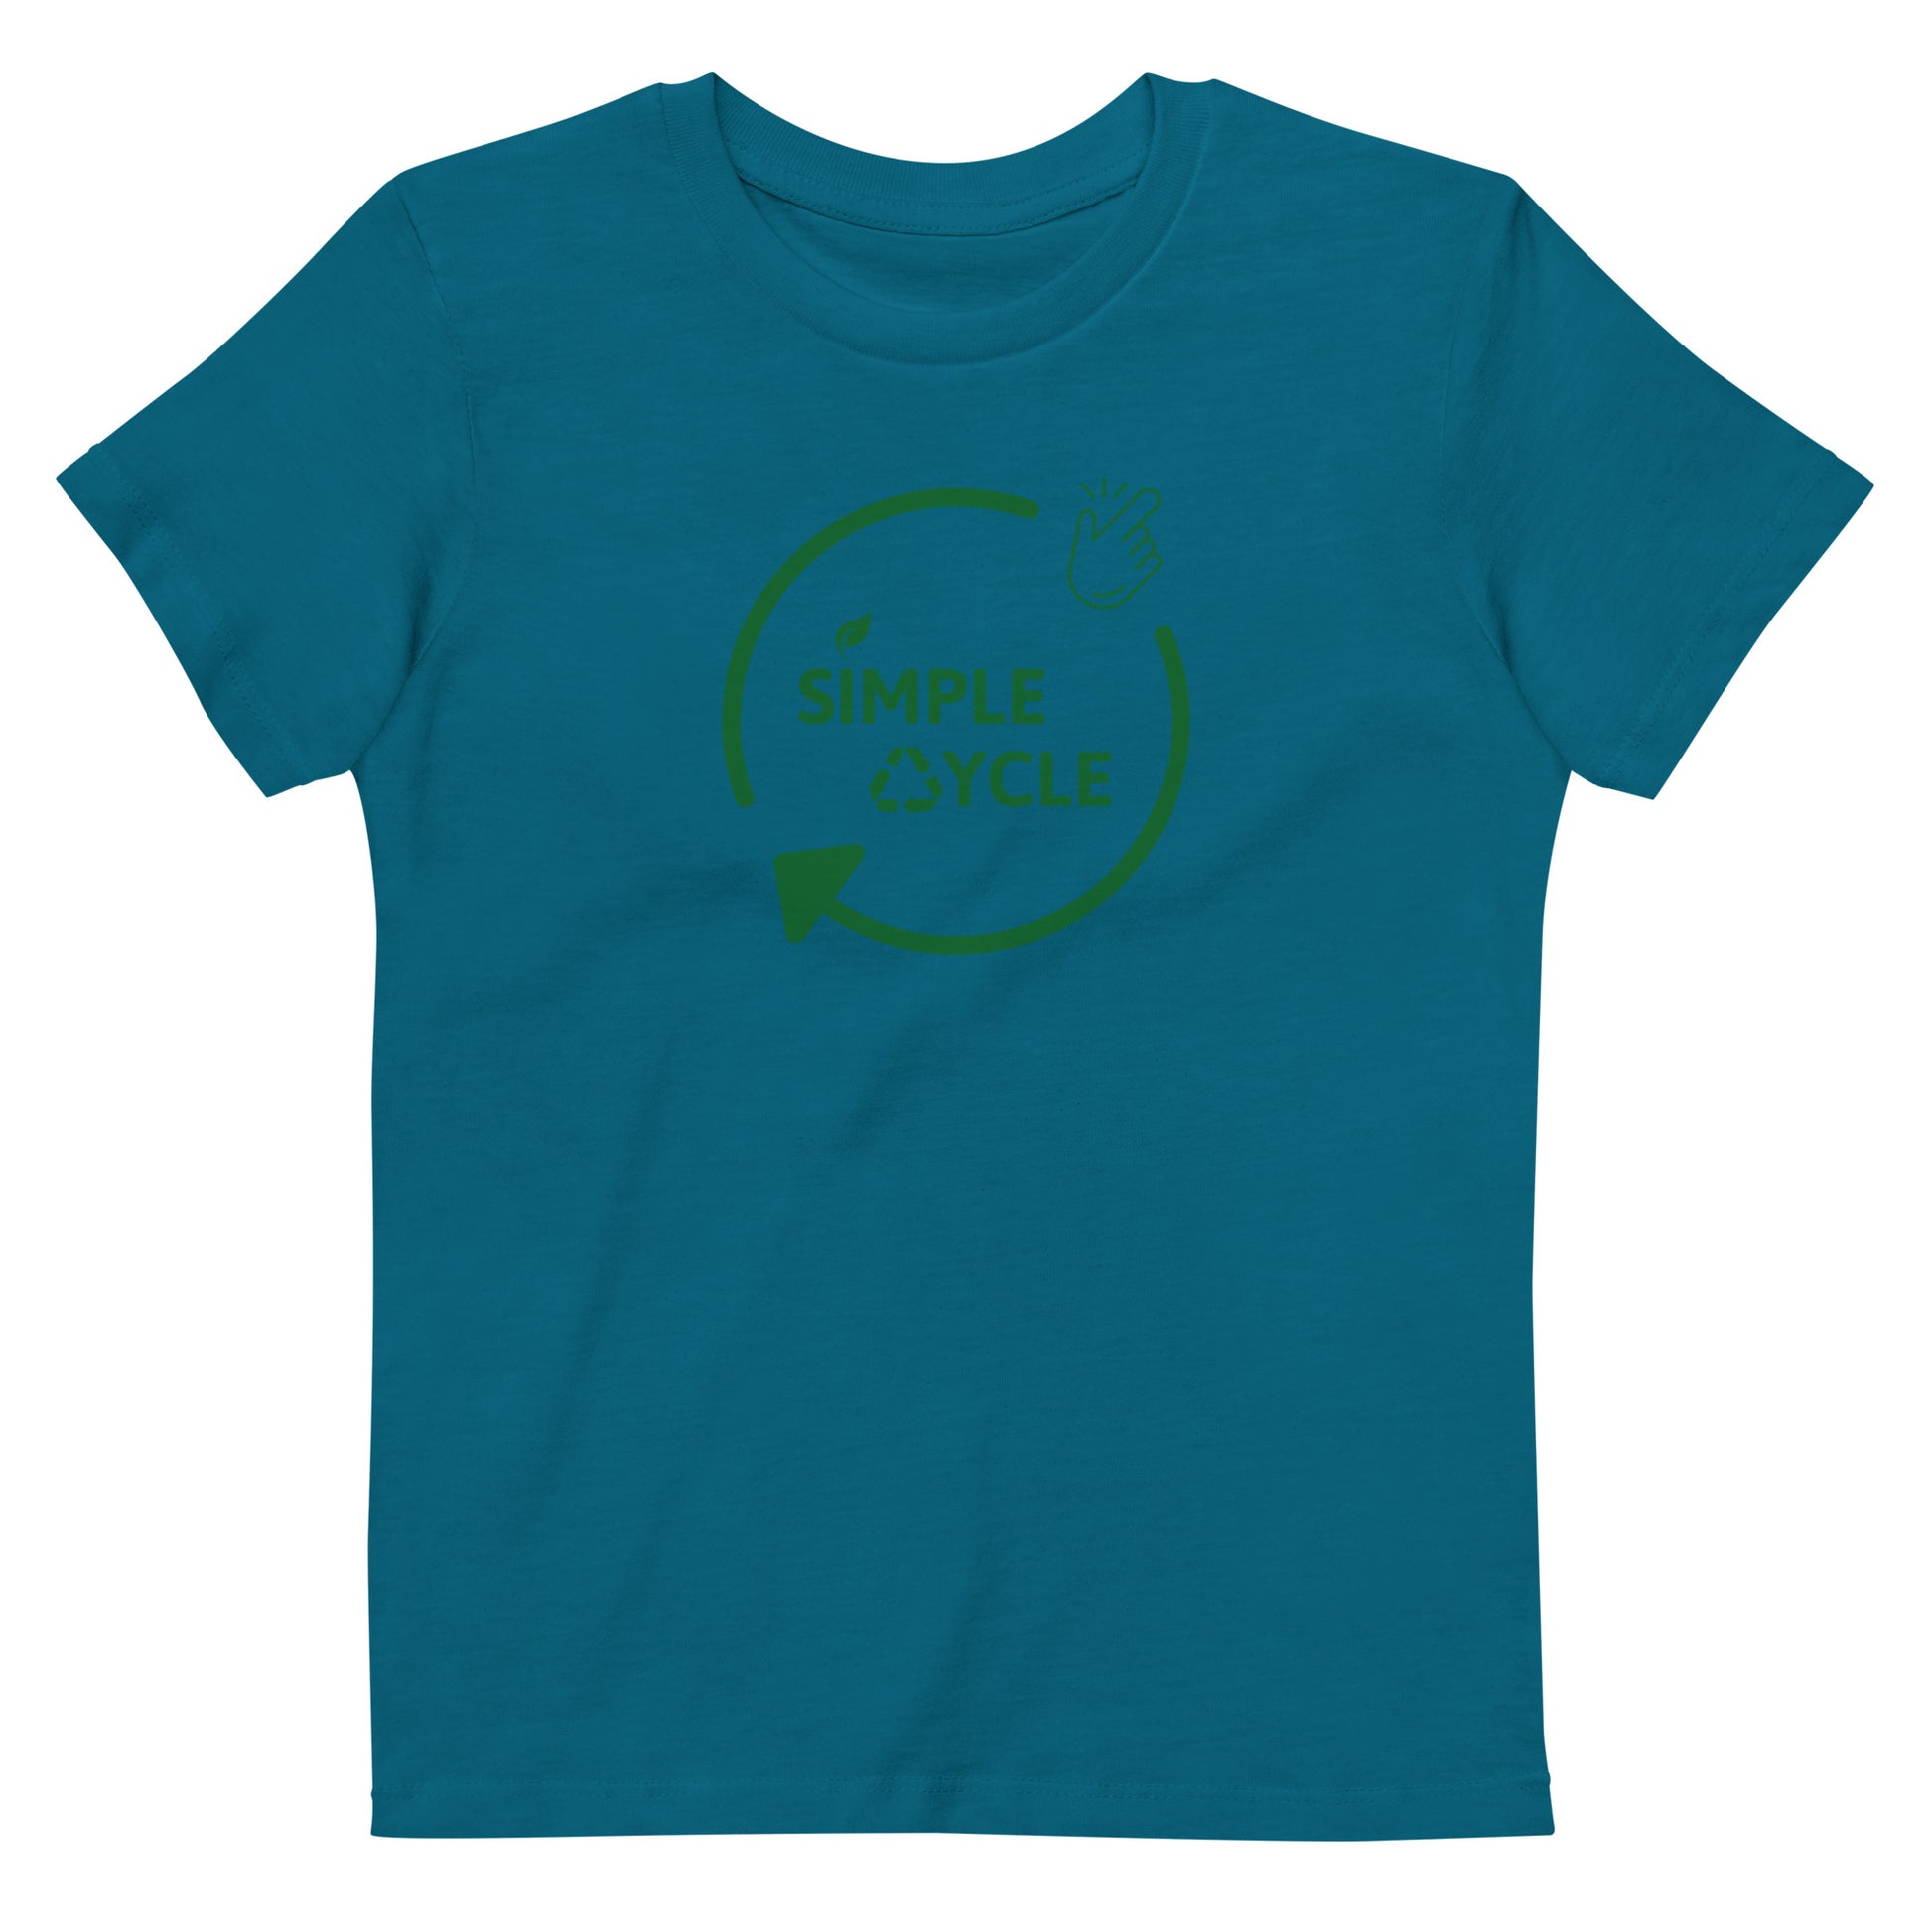 SimpleCycle Organic Cotton Kids T-Shirt blue front view